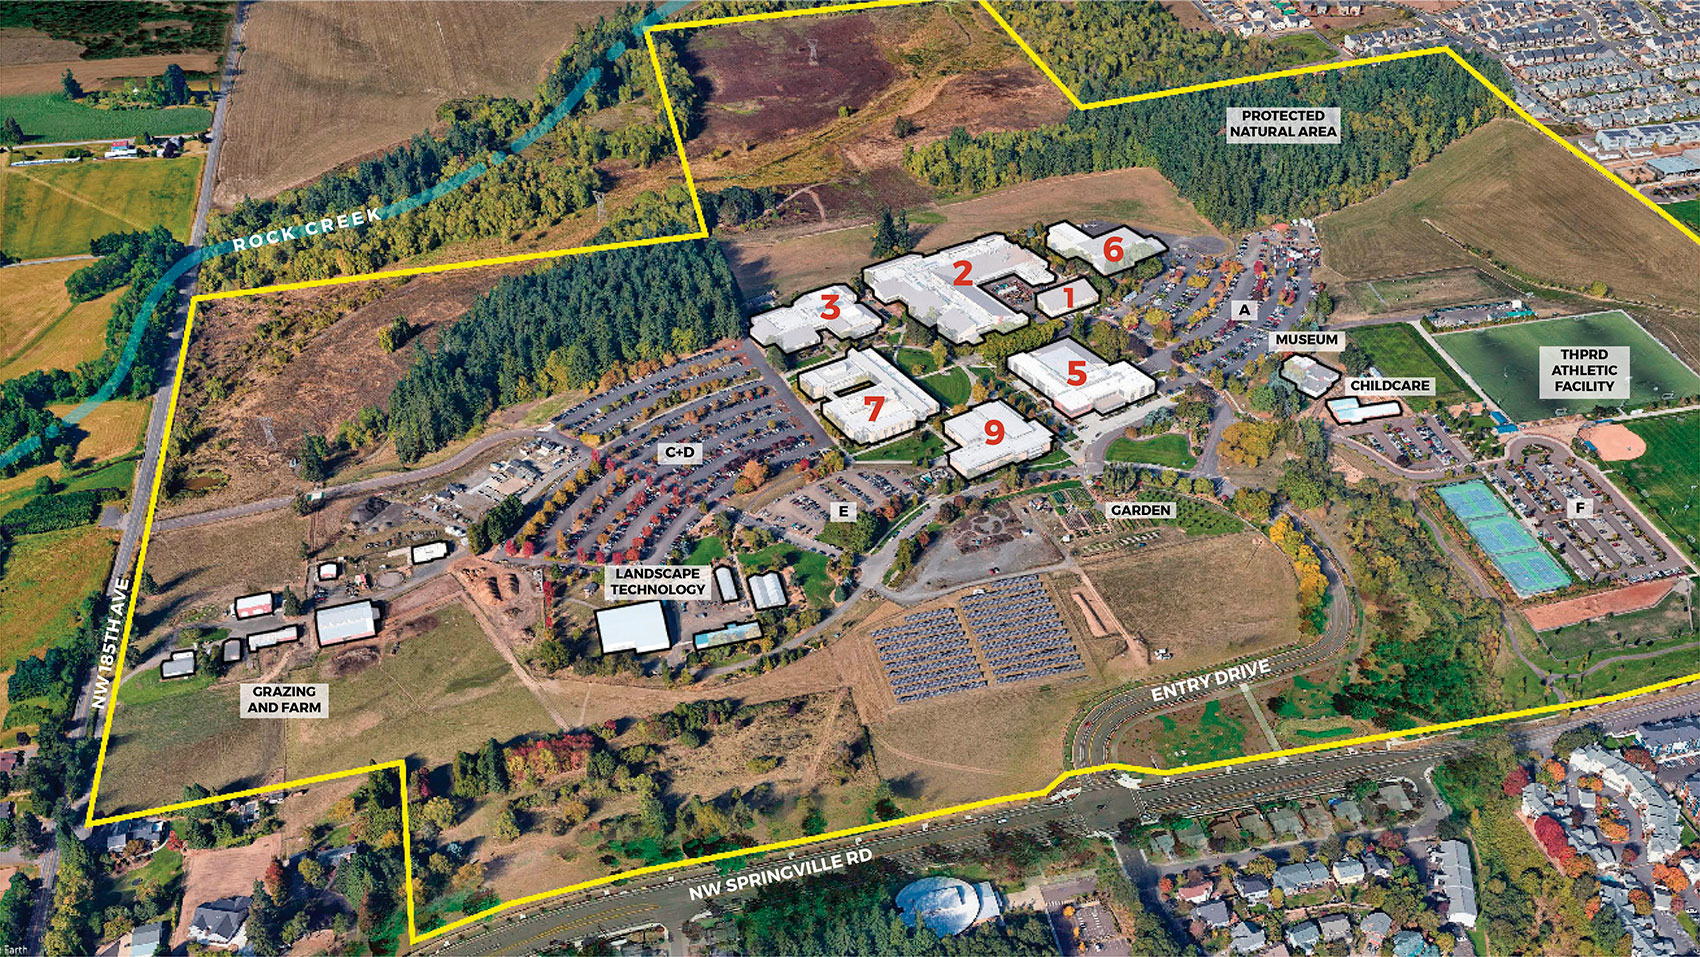 Existing Campus|An aerial photograph view looking down at the Rock Creek Campus from a southern angle, showing the surrounding streets and neighborhoods. Northwest 185th Avenue is visible at the left, and Northwest Springville Road is at the bottom. The campus buildings are in the center of the view, and Rock Creek is shown running along the top of the drawing. The forest is labeled “protected natural area”. The THPRD athletic facility, childcare, museum, learning garden, landscape technology area, and grazing and farm areas are labeled. A yellow line indicates the boundary of the existing campus. The campus buildings are outlined in black and labeled in red.